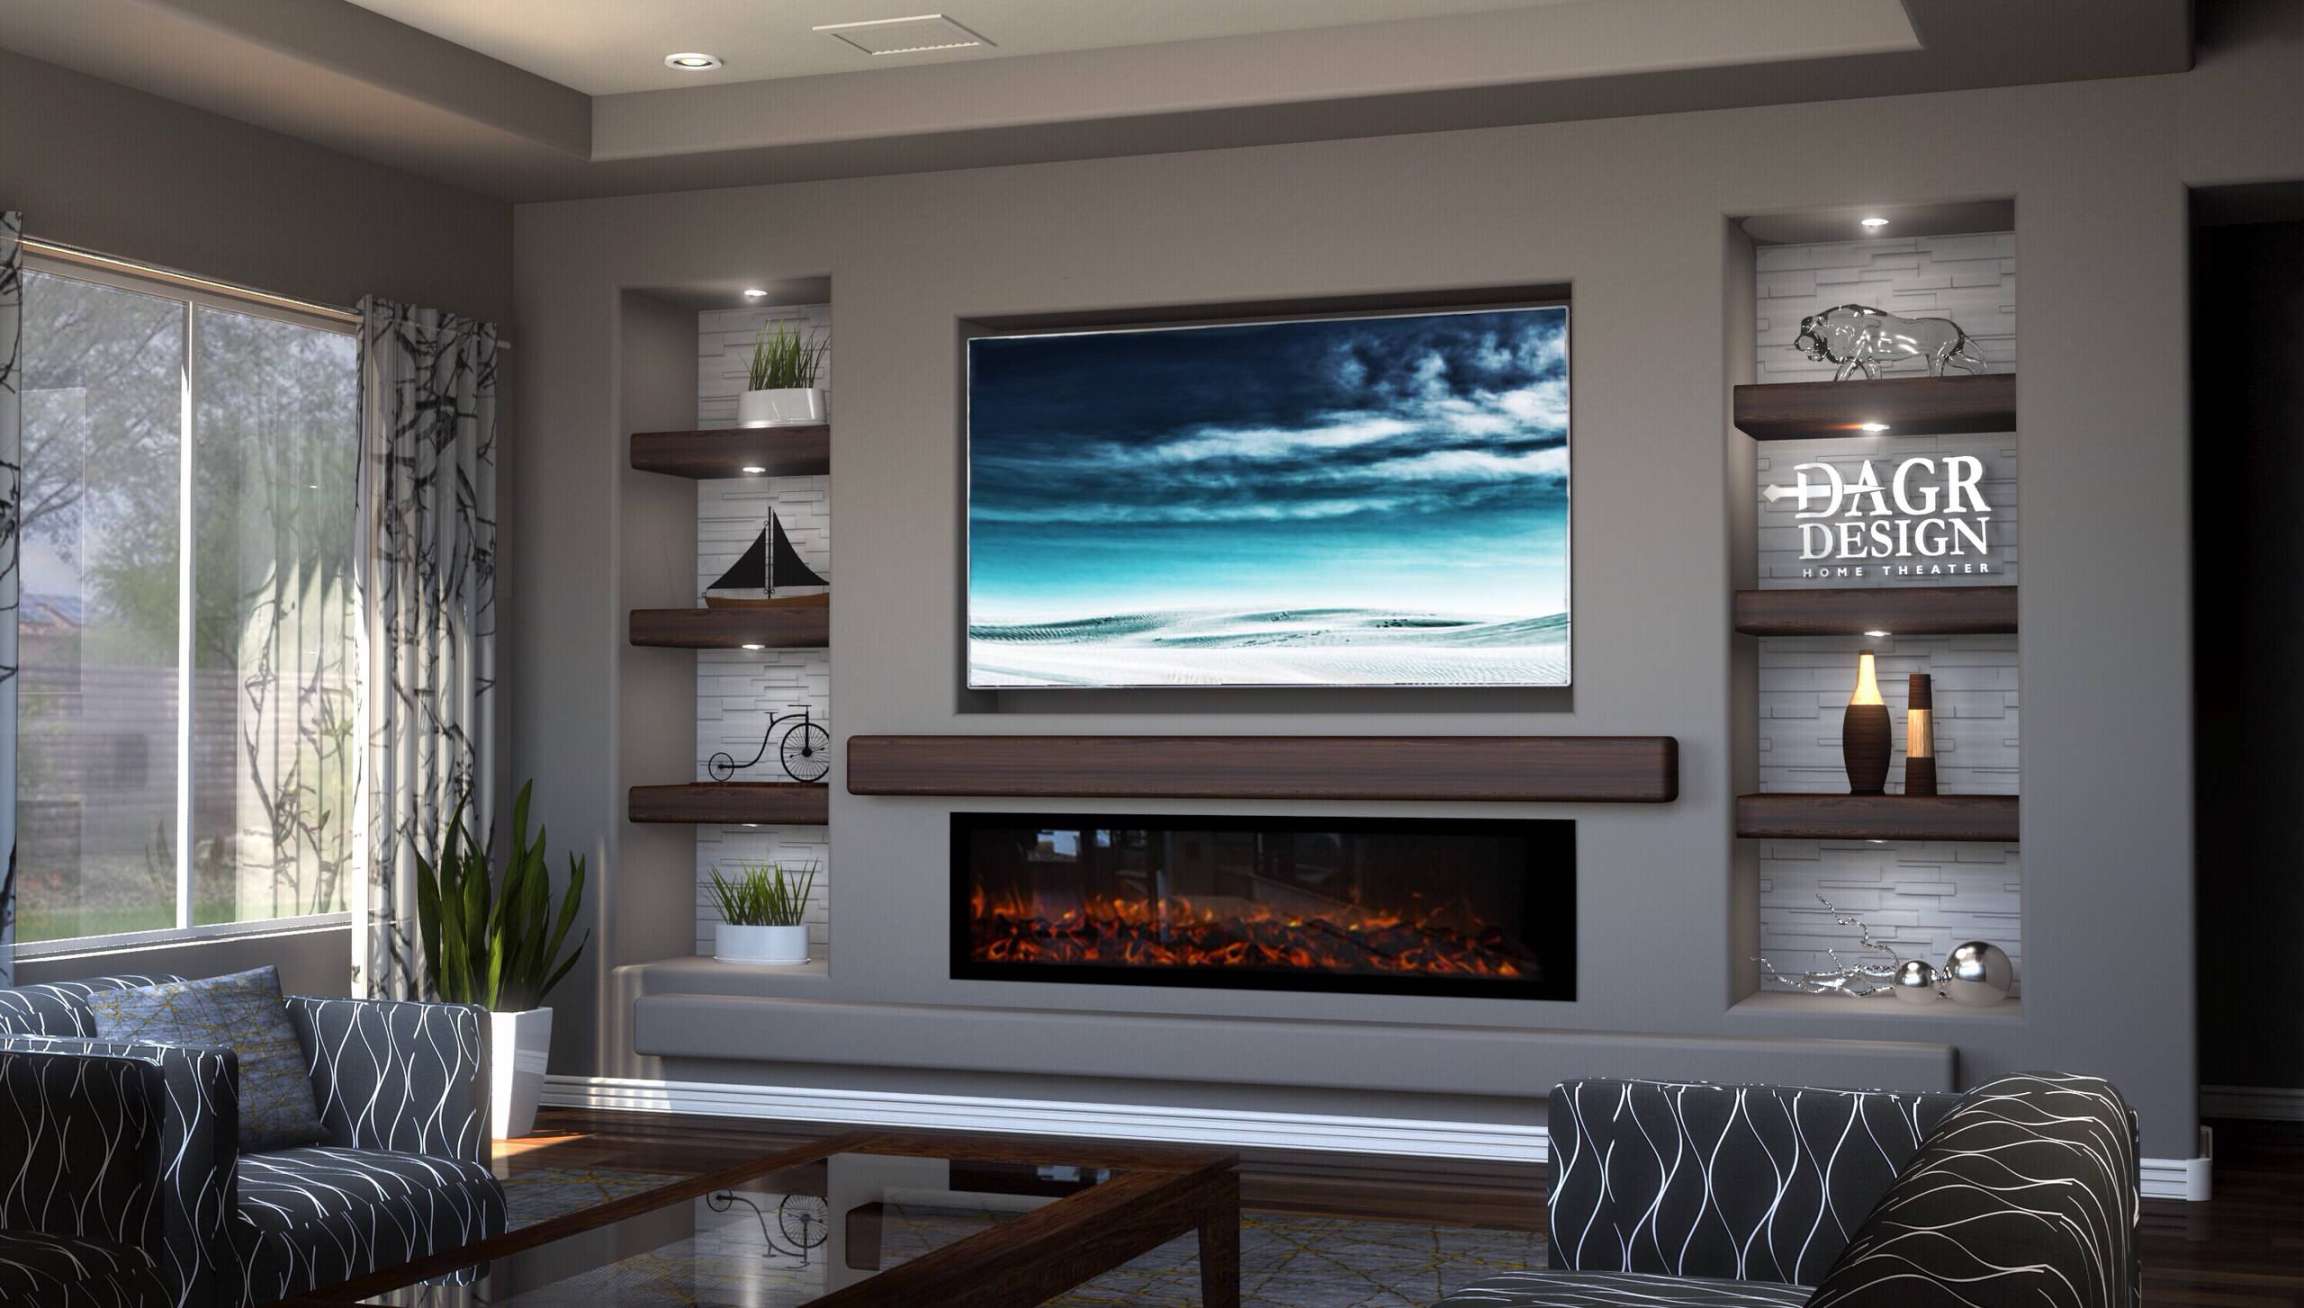 Living Room with a Plaster Fireplace and a Media Wall Ideas You